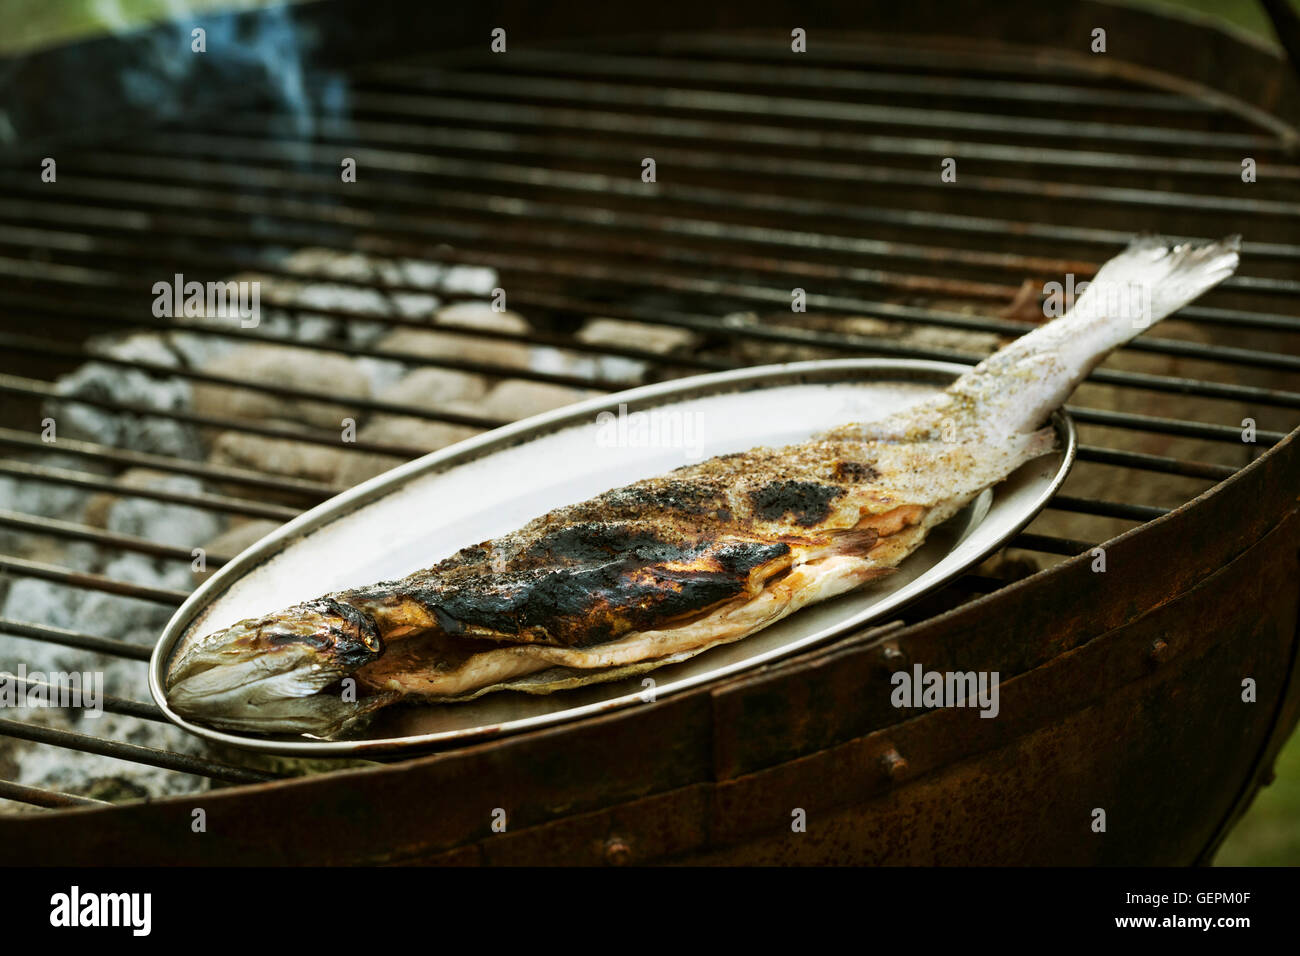 Whole grilled fish on a metal plate standing on a barbecue. Stock Photo